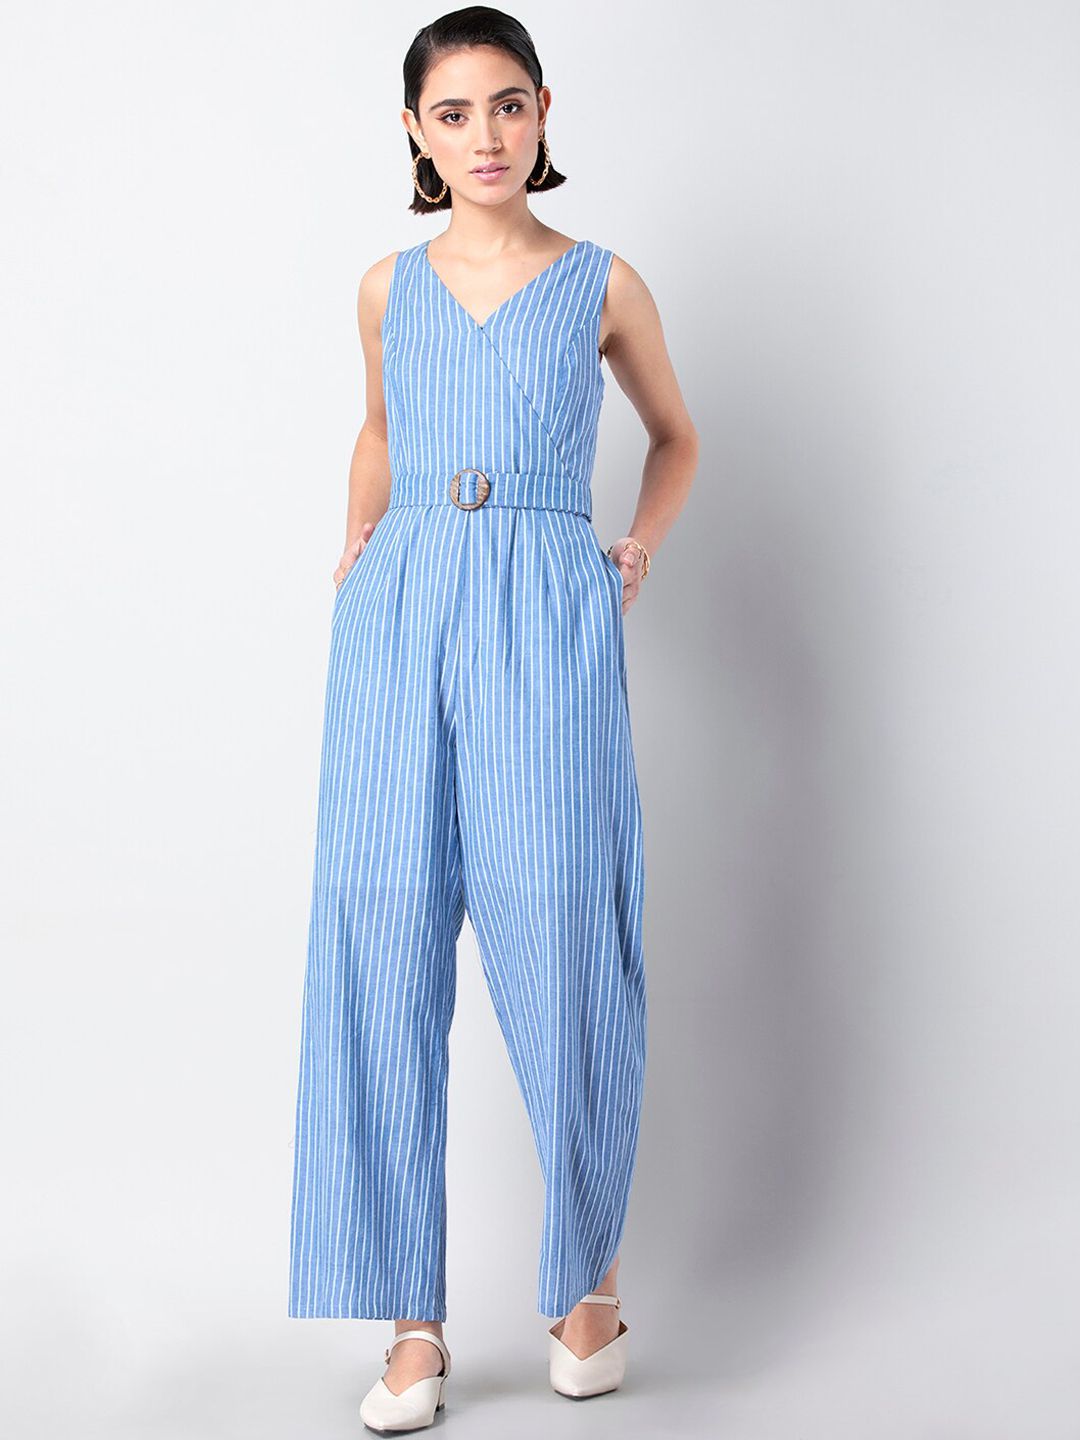 FabAlley Women Blue & White Striped Cotton Basic Jumpsuit Price in India